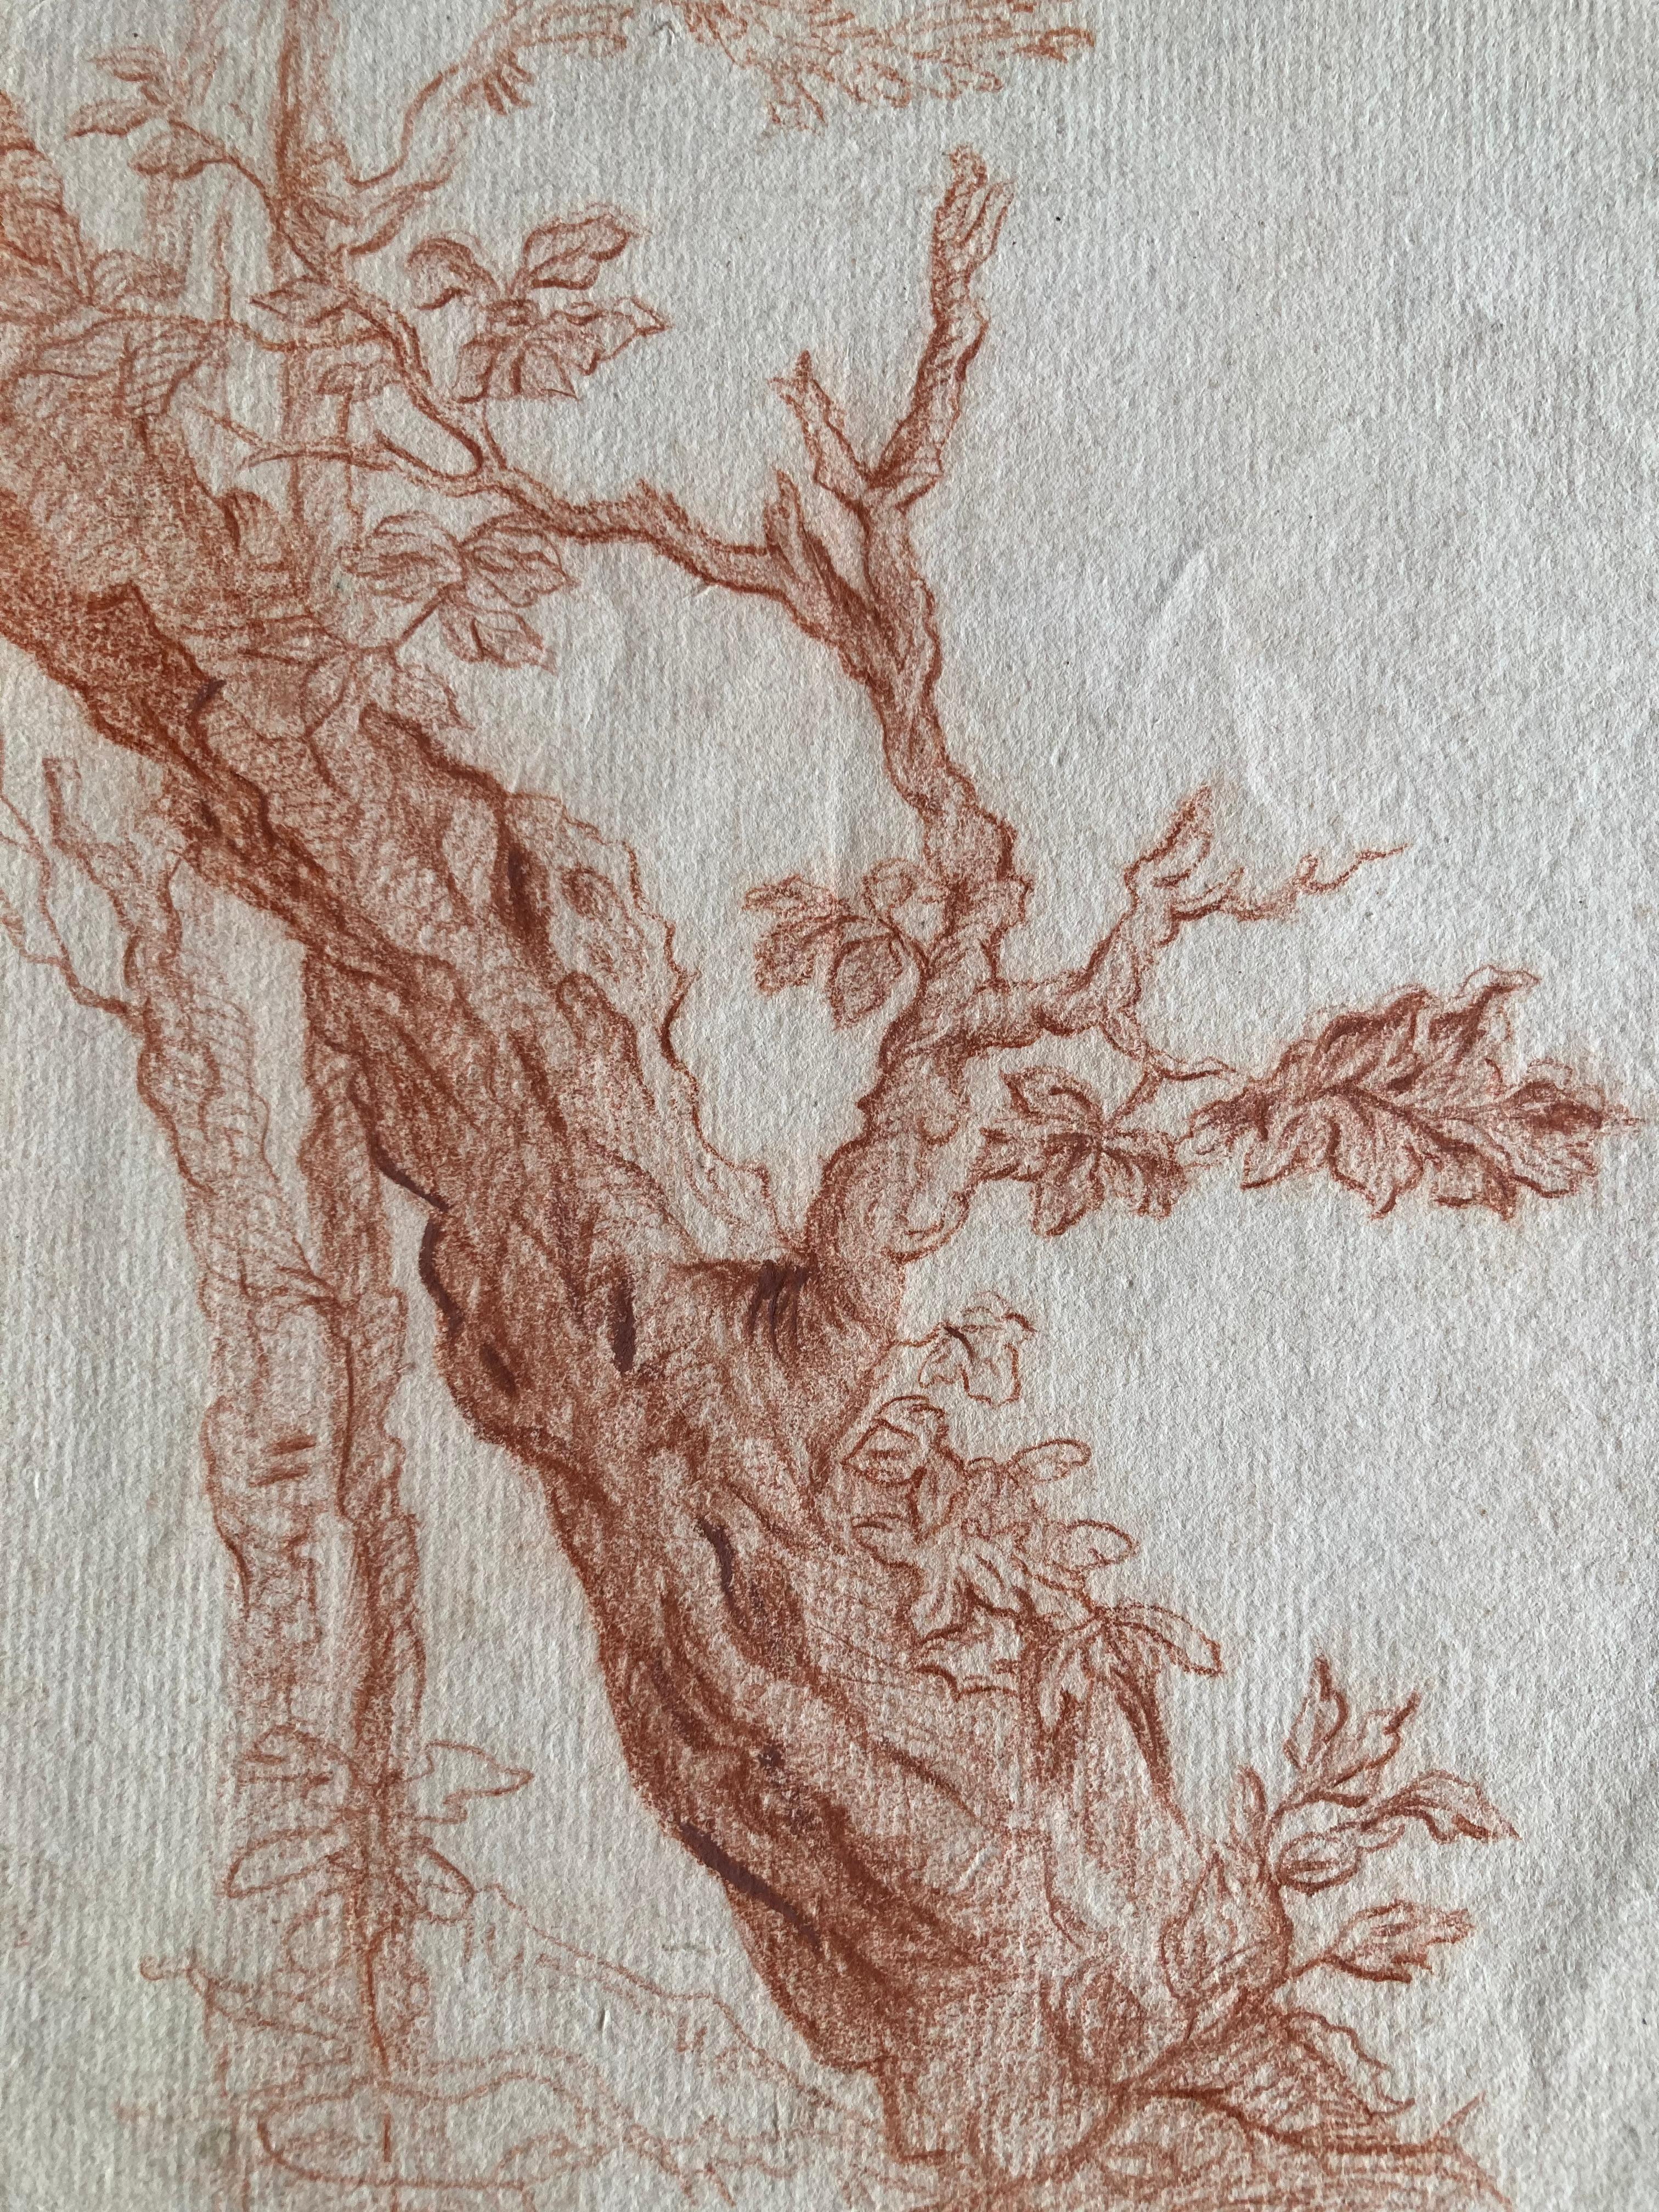 Flemish Artist, Study of a Tree Trunk, Sanguine, Old Master Drawing - Beige Landscape Art by Unknown